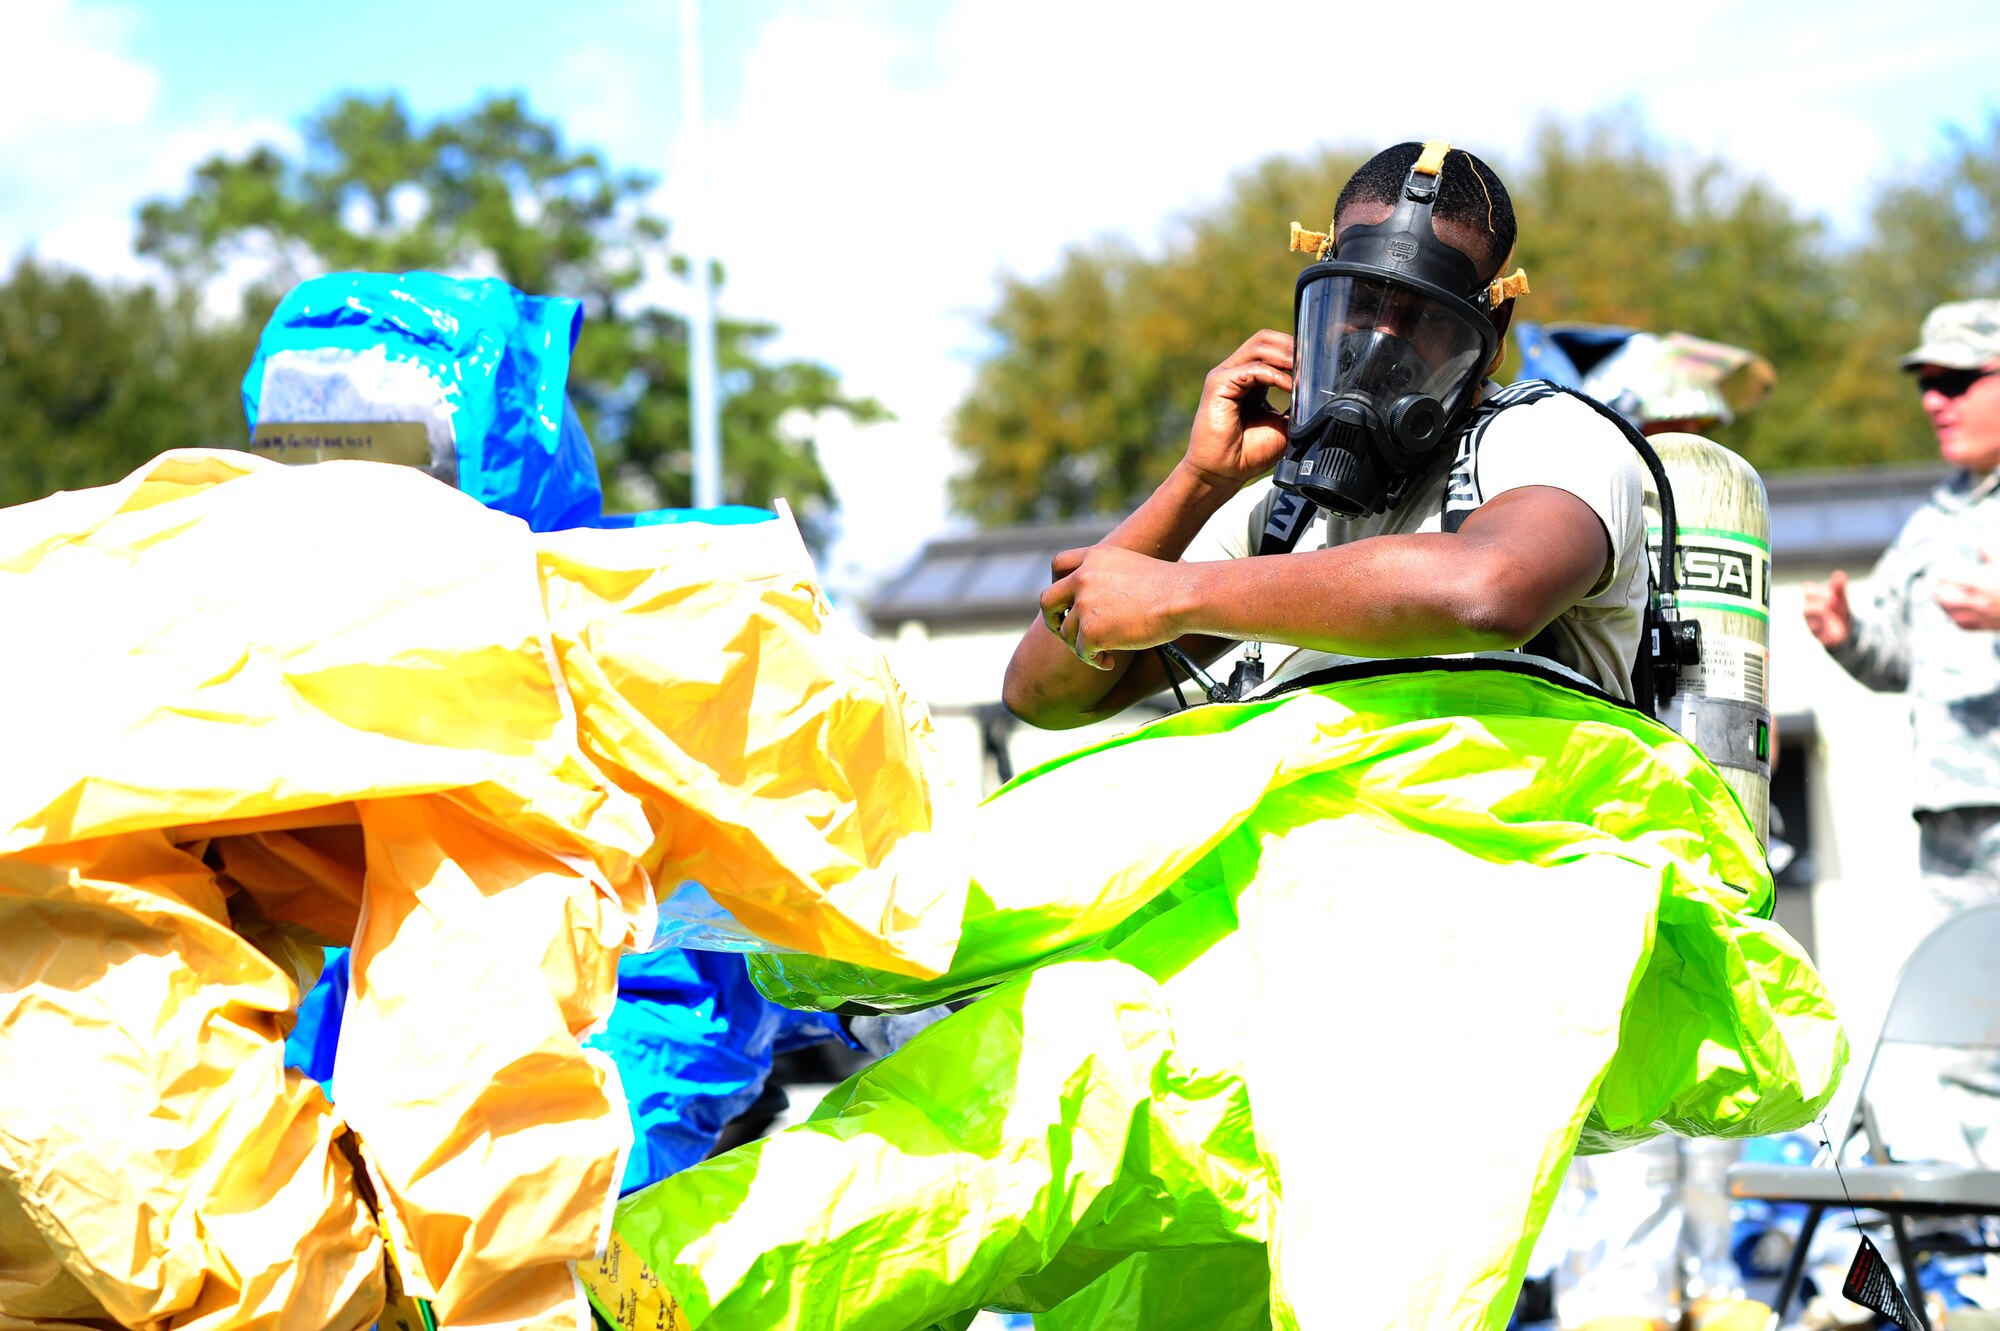 Airmen from the 315th Civil Engineering Flight conduct an exercise at their training facility at Joint Base Charleston, S.C., March 5, 2016. Members faced a scenario that required the cooperation between their firefighters, emergency management and explosive ordinance device units in order to develop a safe solution, while properly using their safety equipment. (U.S. Air Force photo by Senior Airman Jonathan Lane)